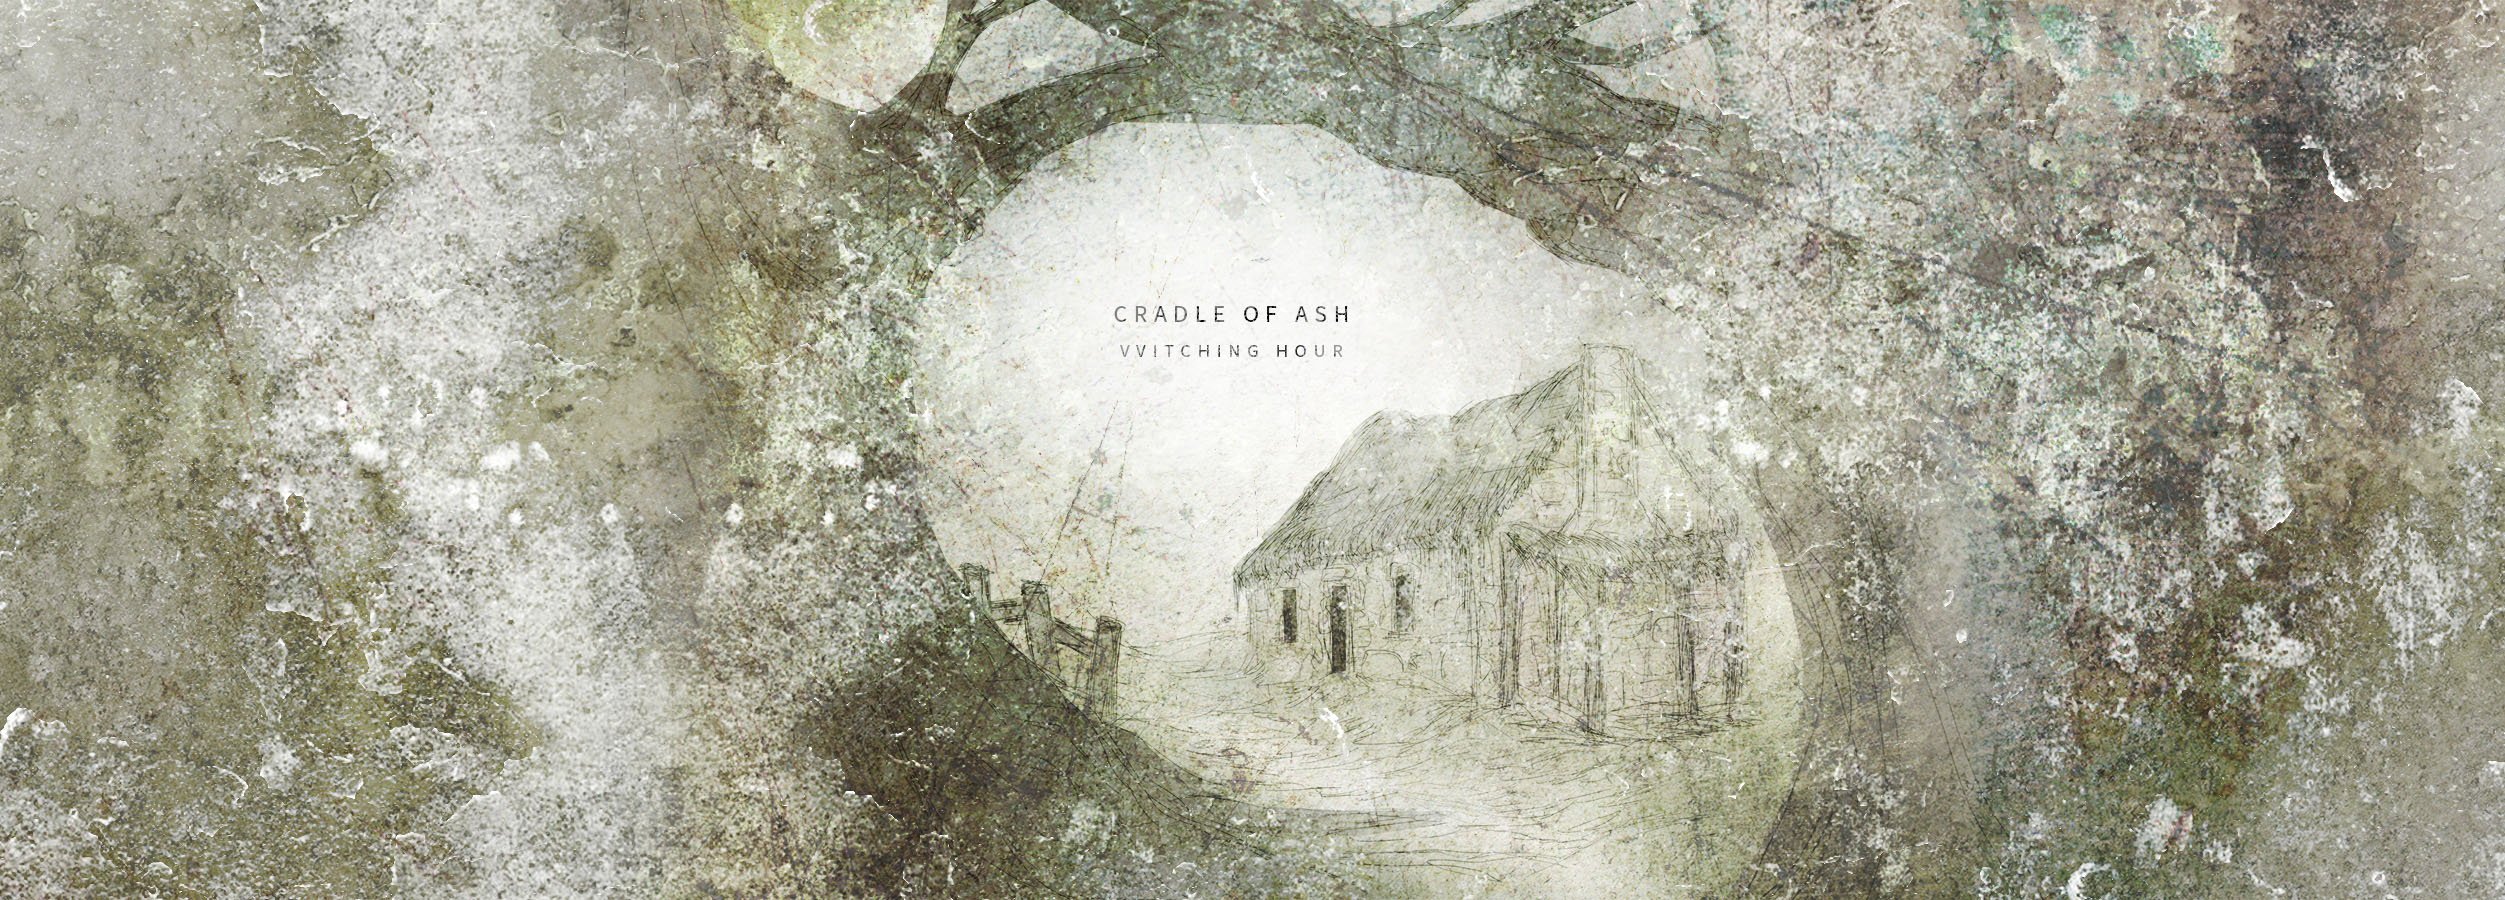 VVitching Hour: Cradle of Ash